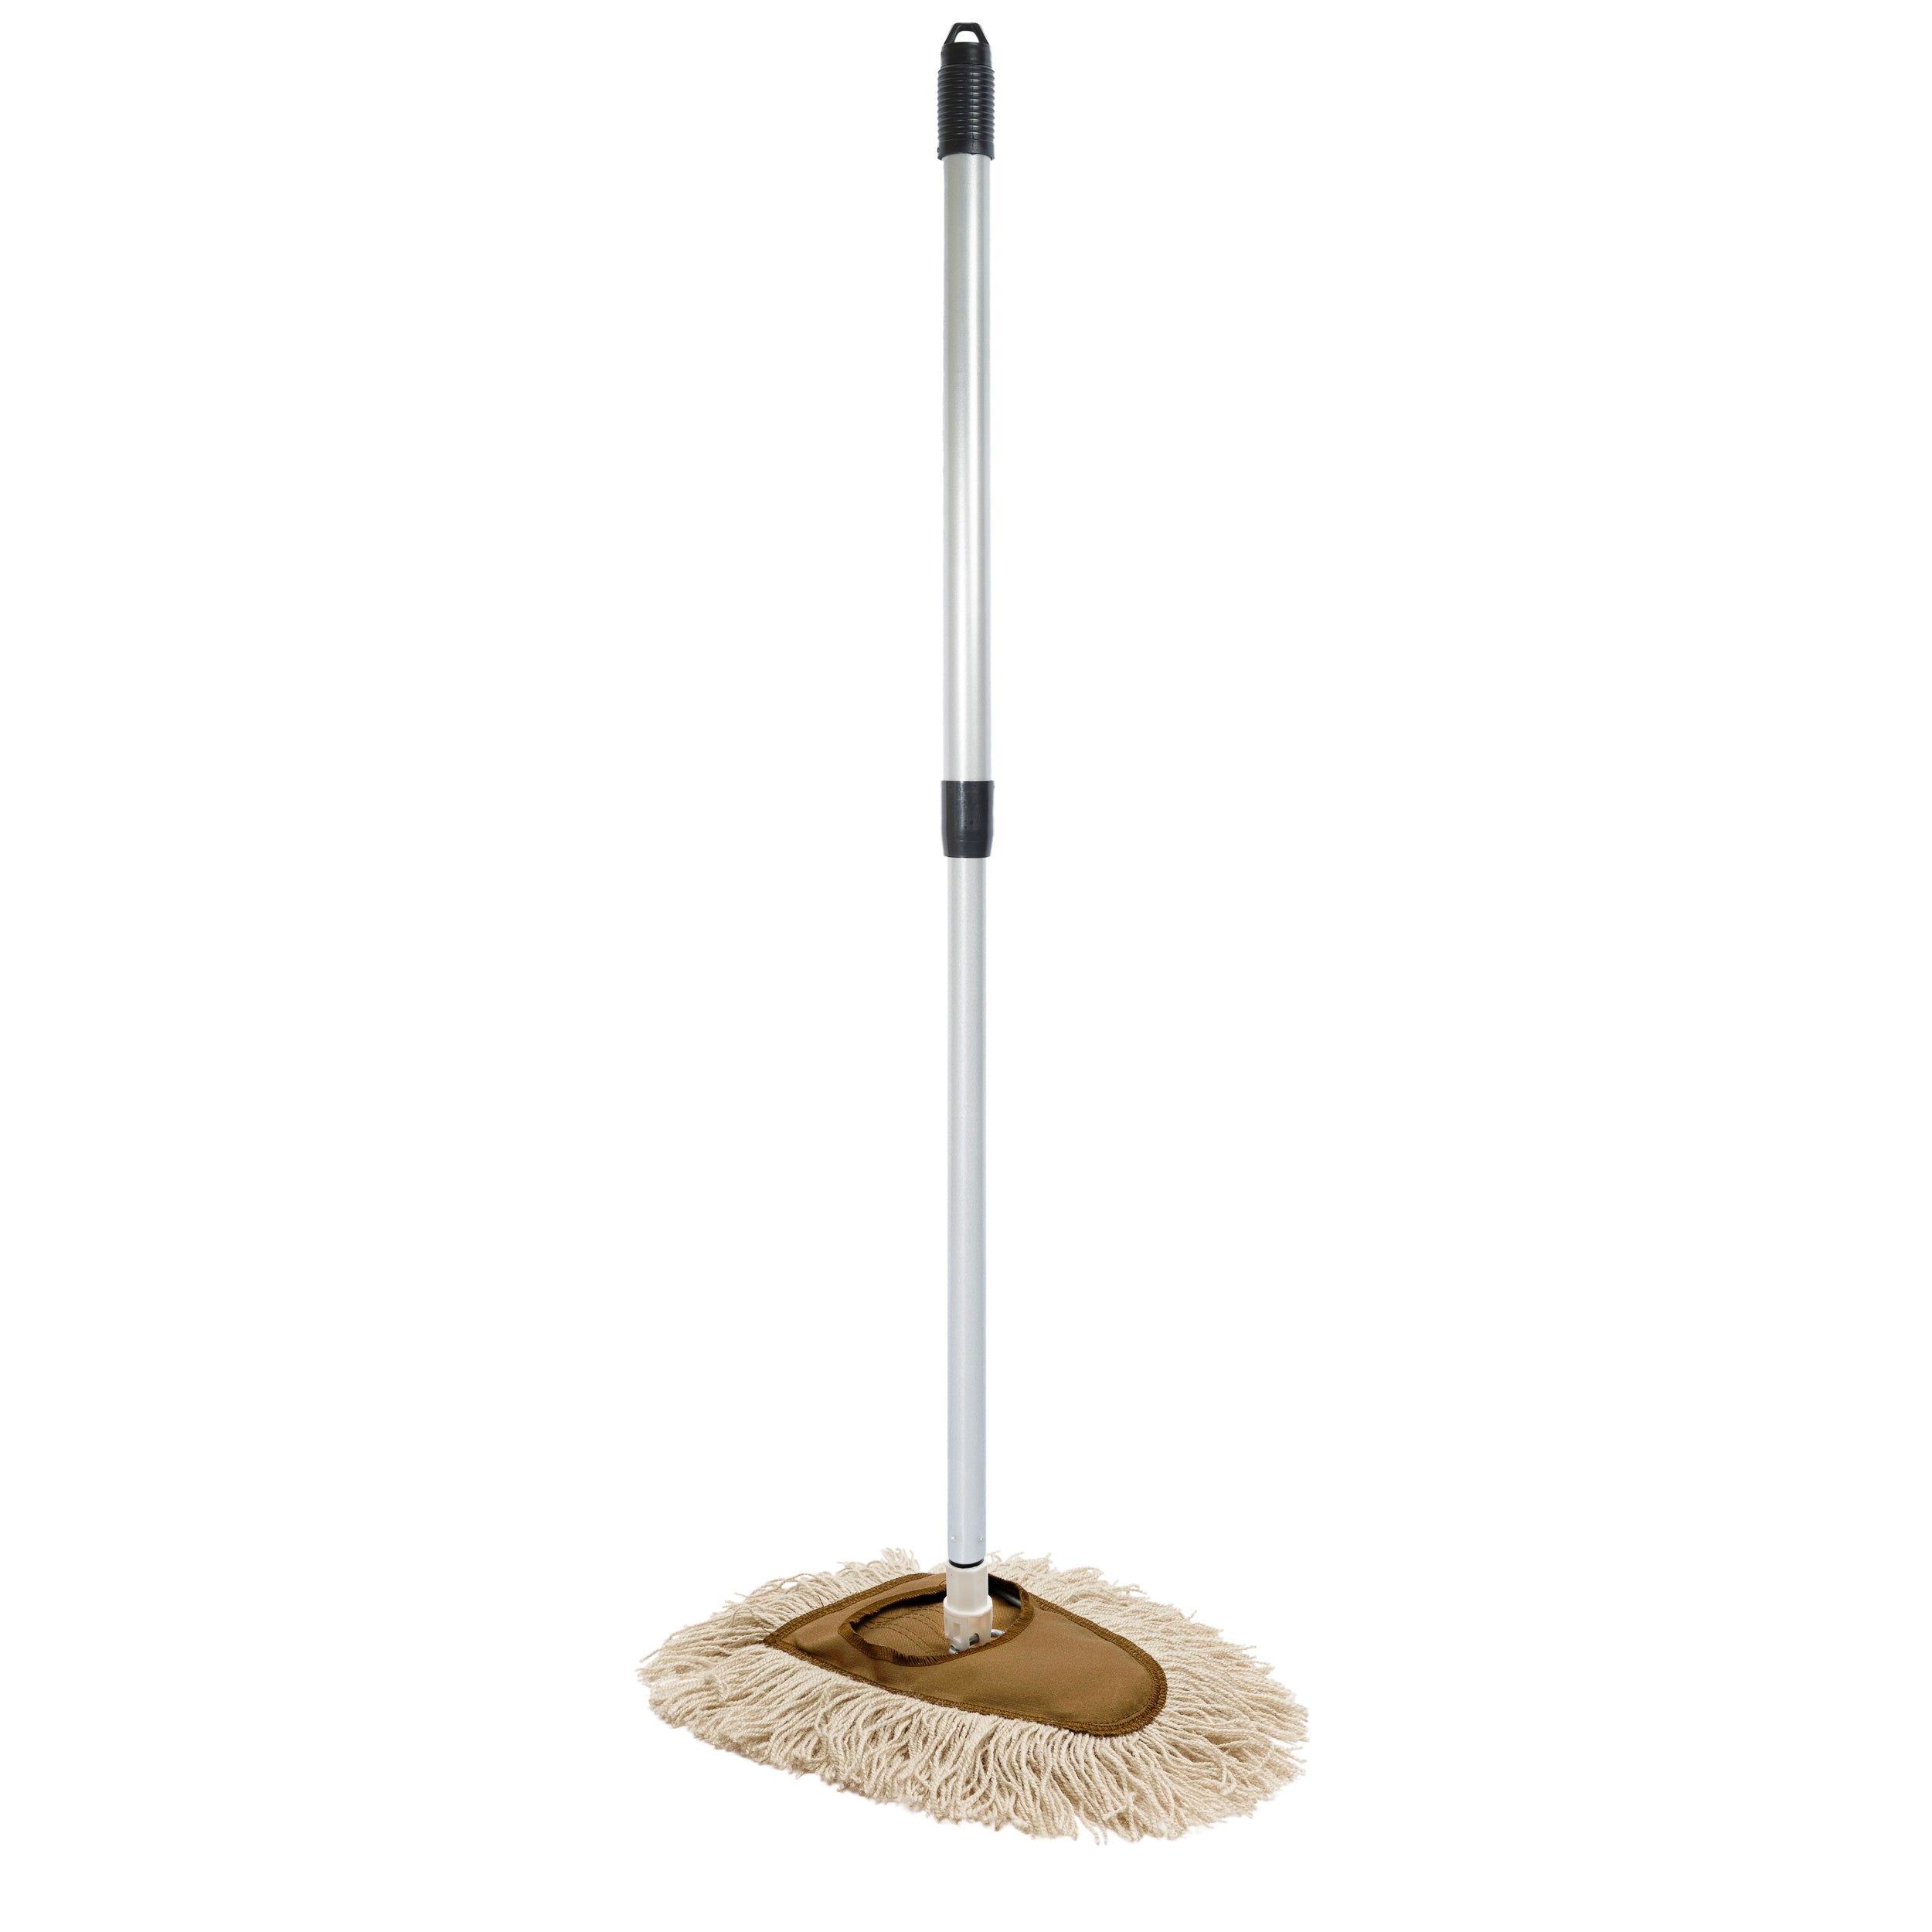 Fuller Brush Dry Mop - Washable Cotton Mop Head with Adjustable Handle w/  Duster Spray - Removes Dust and Dirt from Surfaces and Hard to Reach Areas